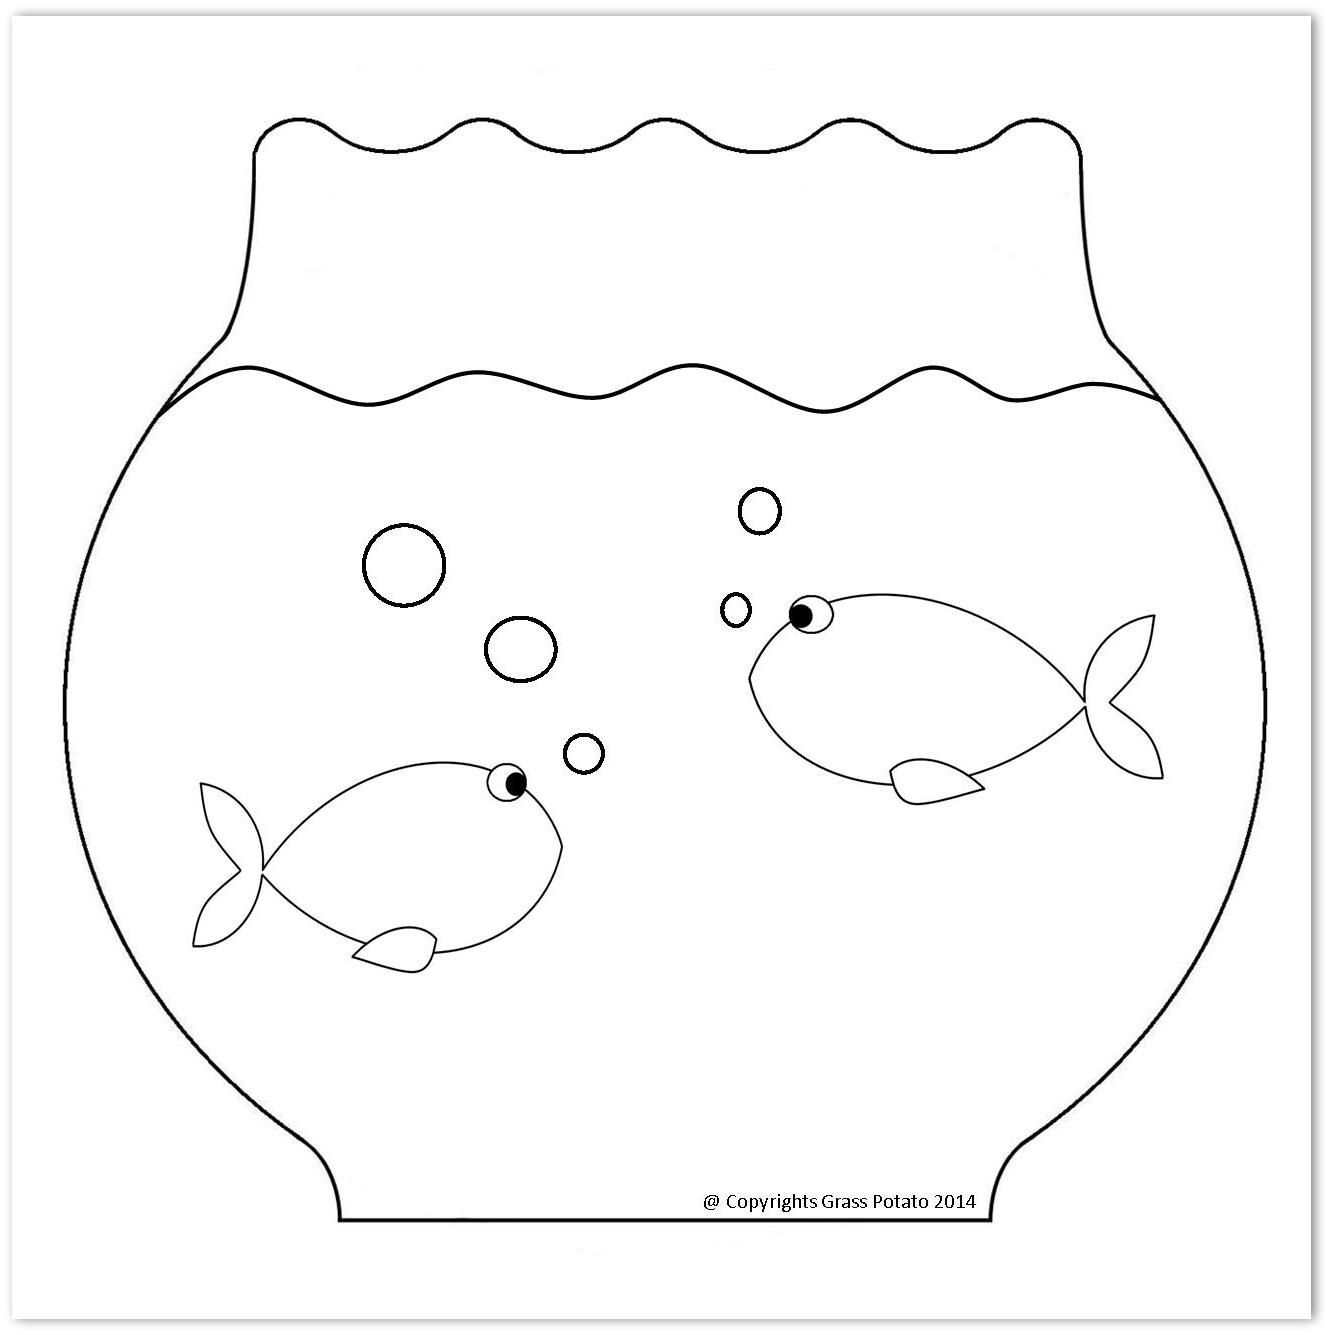 Large fish bowl with two fish, water, and bubbles inside